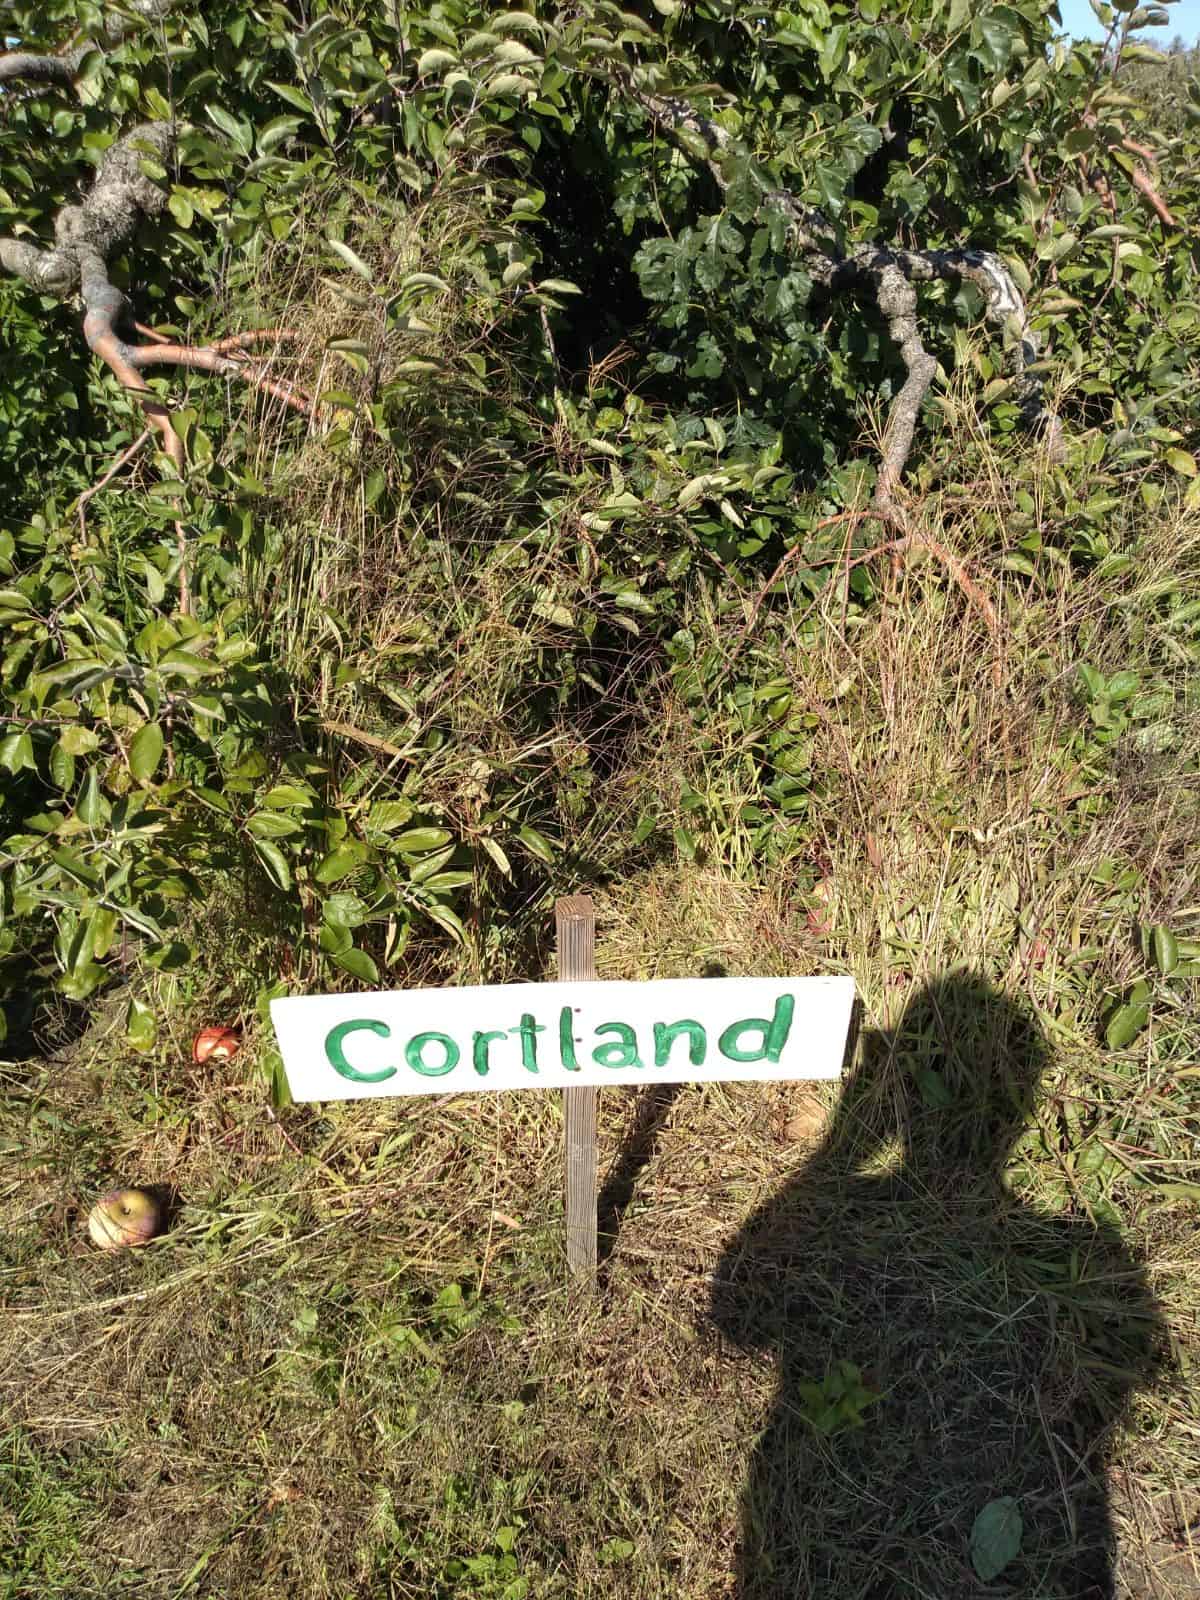 A Cortland apple sign at an orchard.